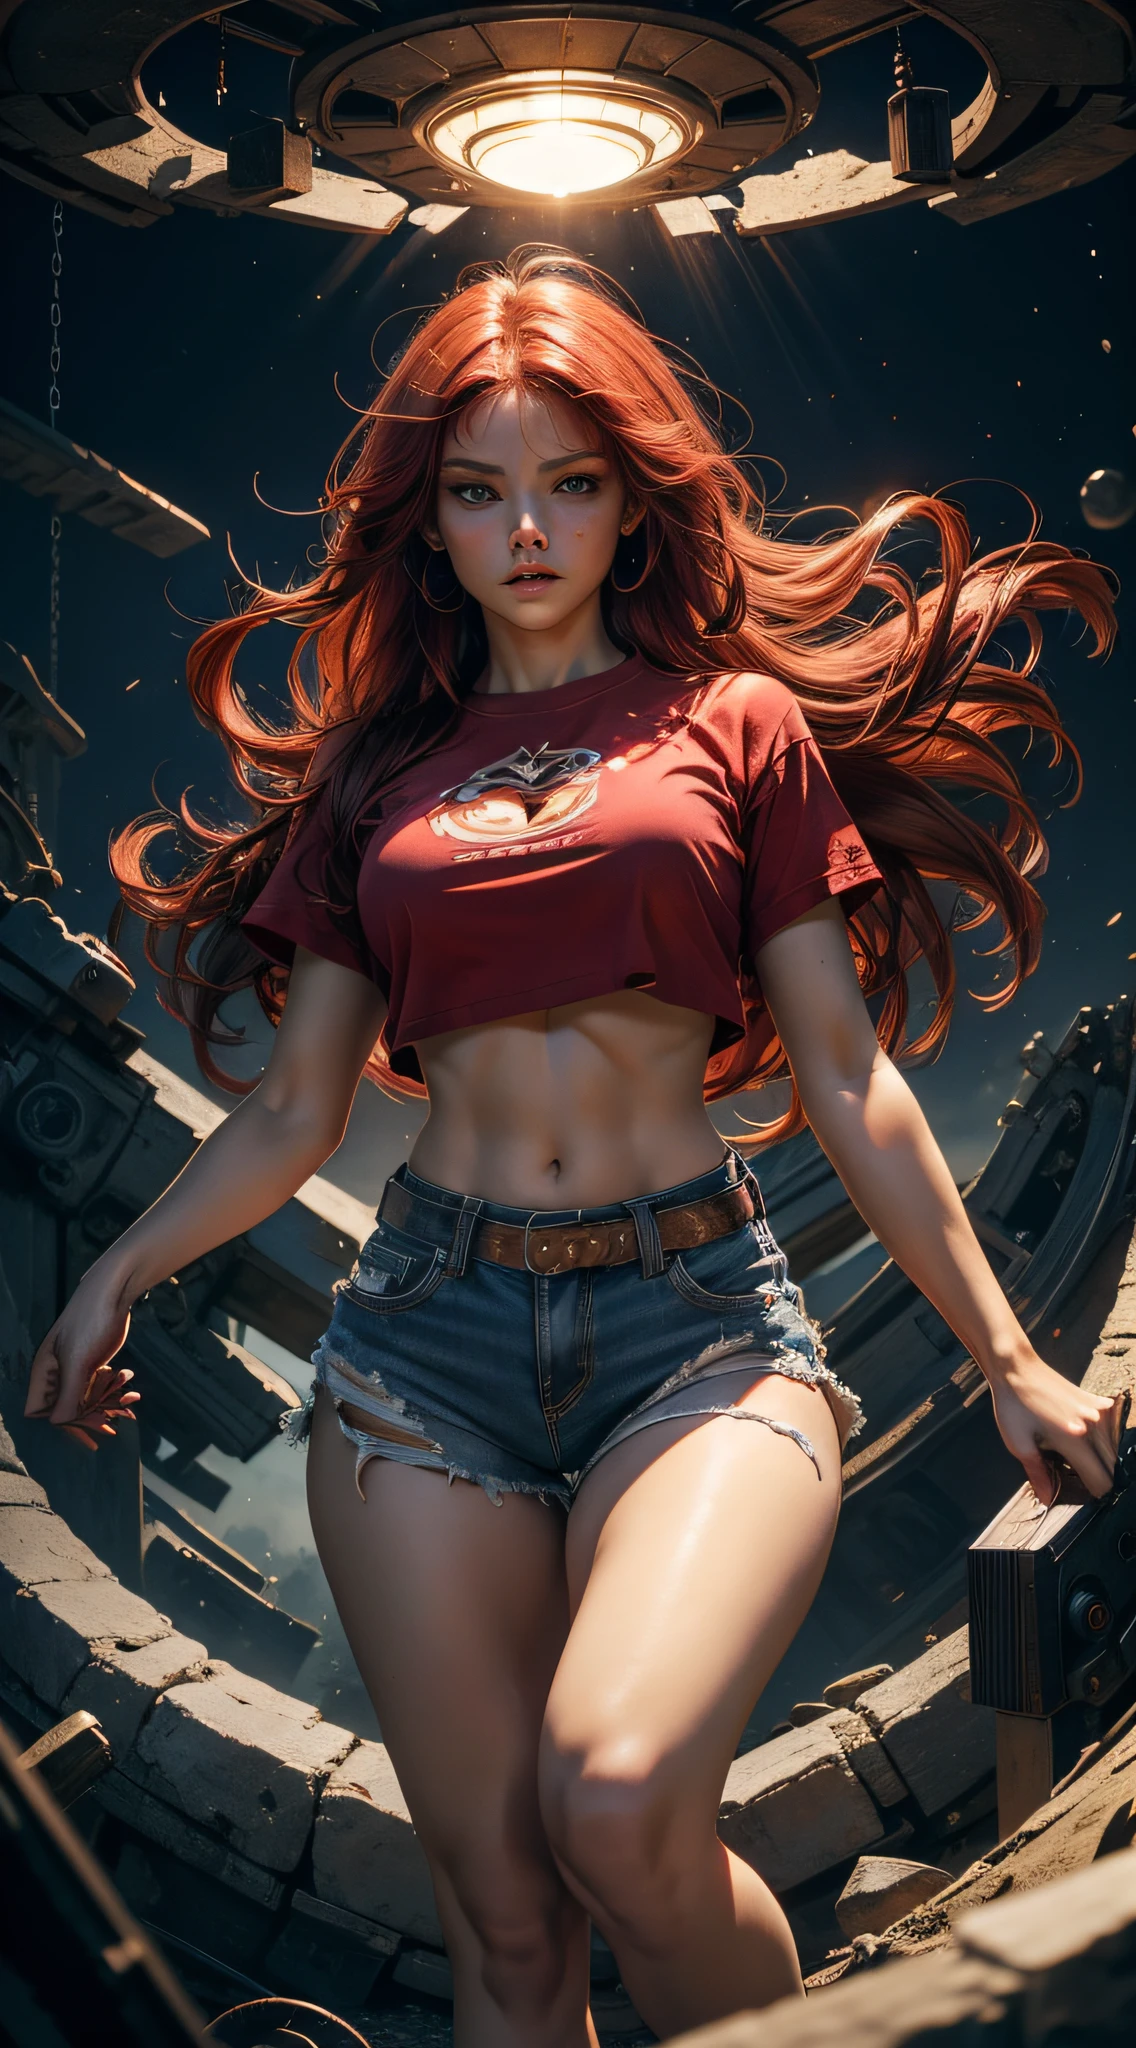 ((Best Quality)), ((Masterpiece)), (Detailed: 1.4), 8k, 1girl, blue eyes, red hair, very long hair, silky hair, big chest, slim waist, big body, defined body, thick thigh, well defined thigh. Wearing ripped micro shorts, babylook t-shirt. A concentration pose looking seriously at the viewer, low angle, view from the ground. Emitting a huge aura enveloping the entire body, a whirlpool of immense power enveloping the entire body, ki charge, intricate white aura with red aura.